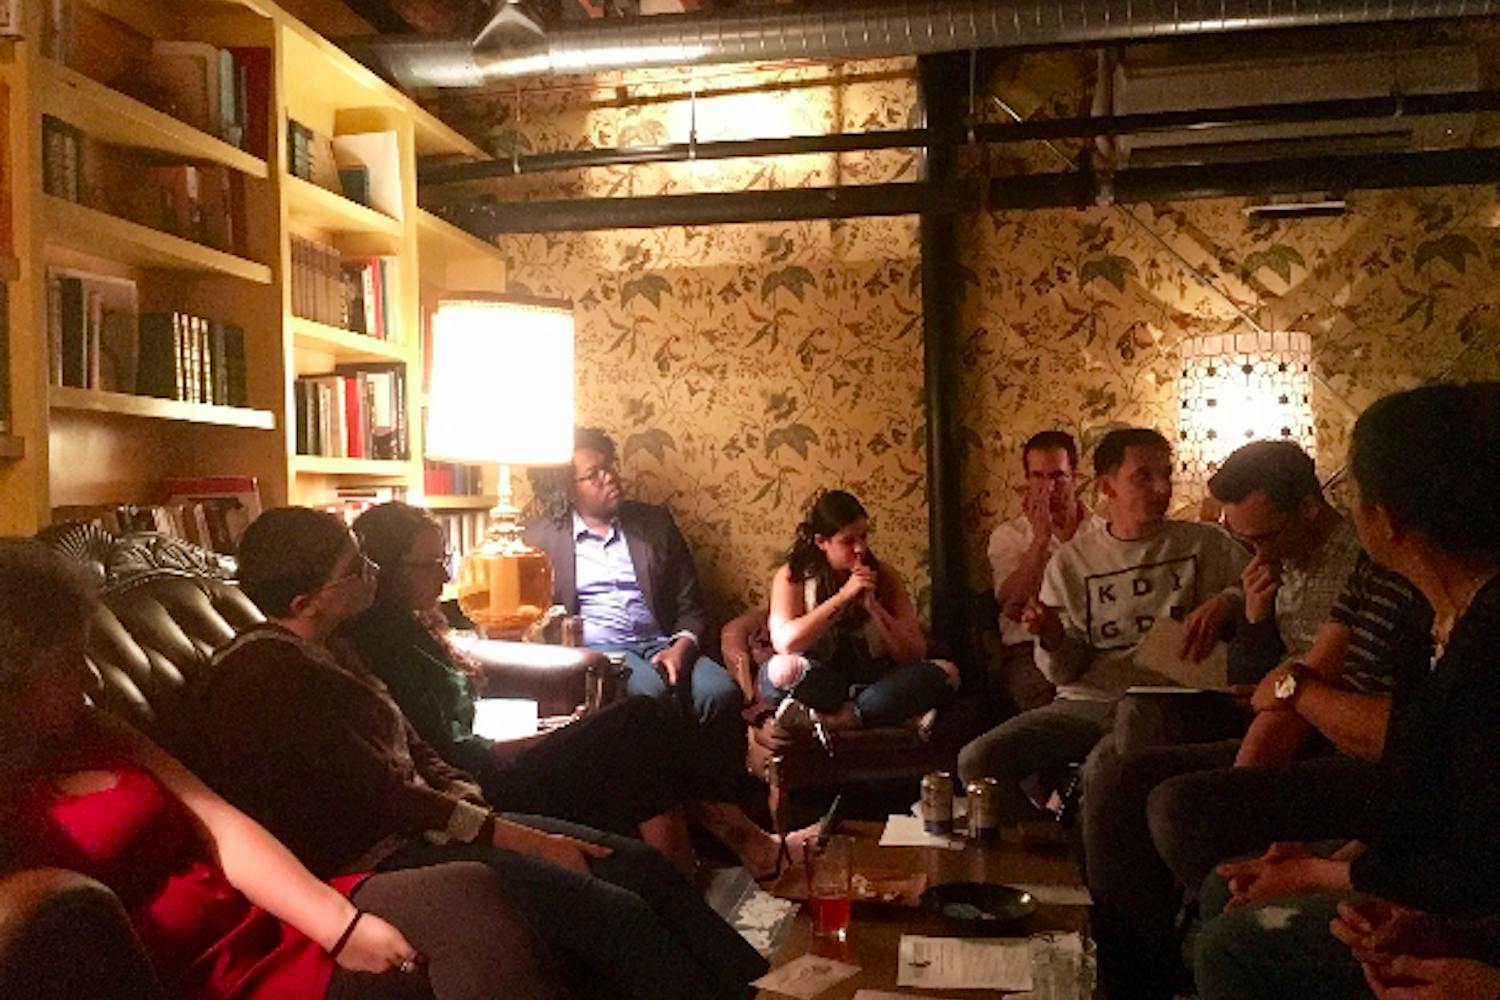 The February “Get Lit” discussion at Valley Bar on Thursday,&nbsp;Feb. 2, 2017 involved thought-provoking ideas of how people consume media in the era of a Trump presidency.